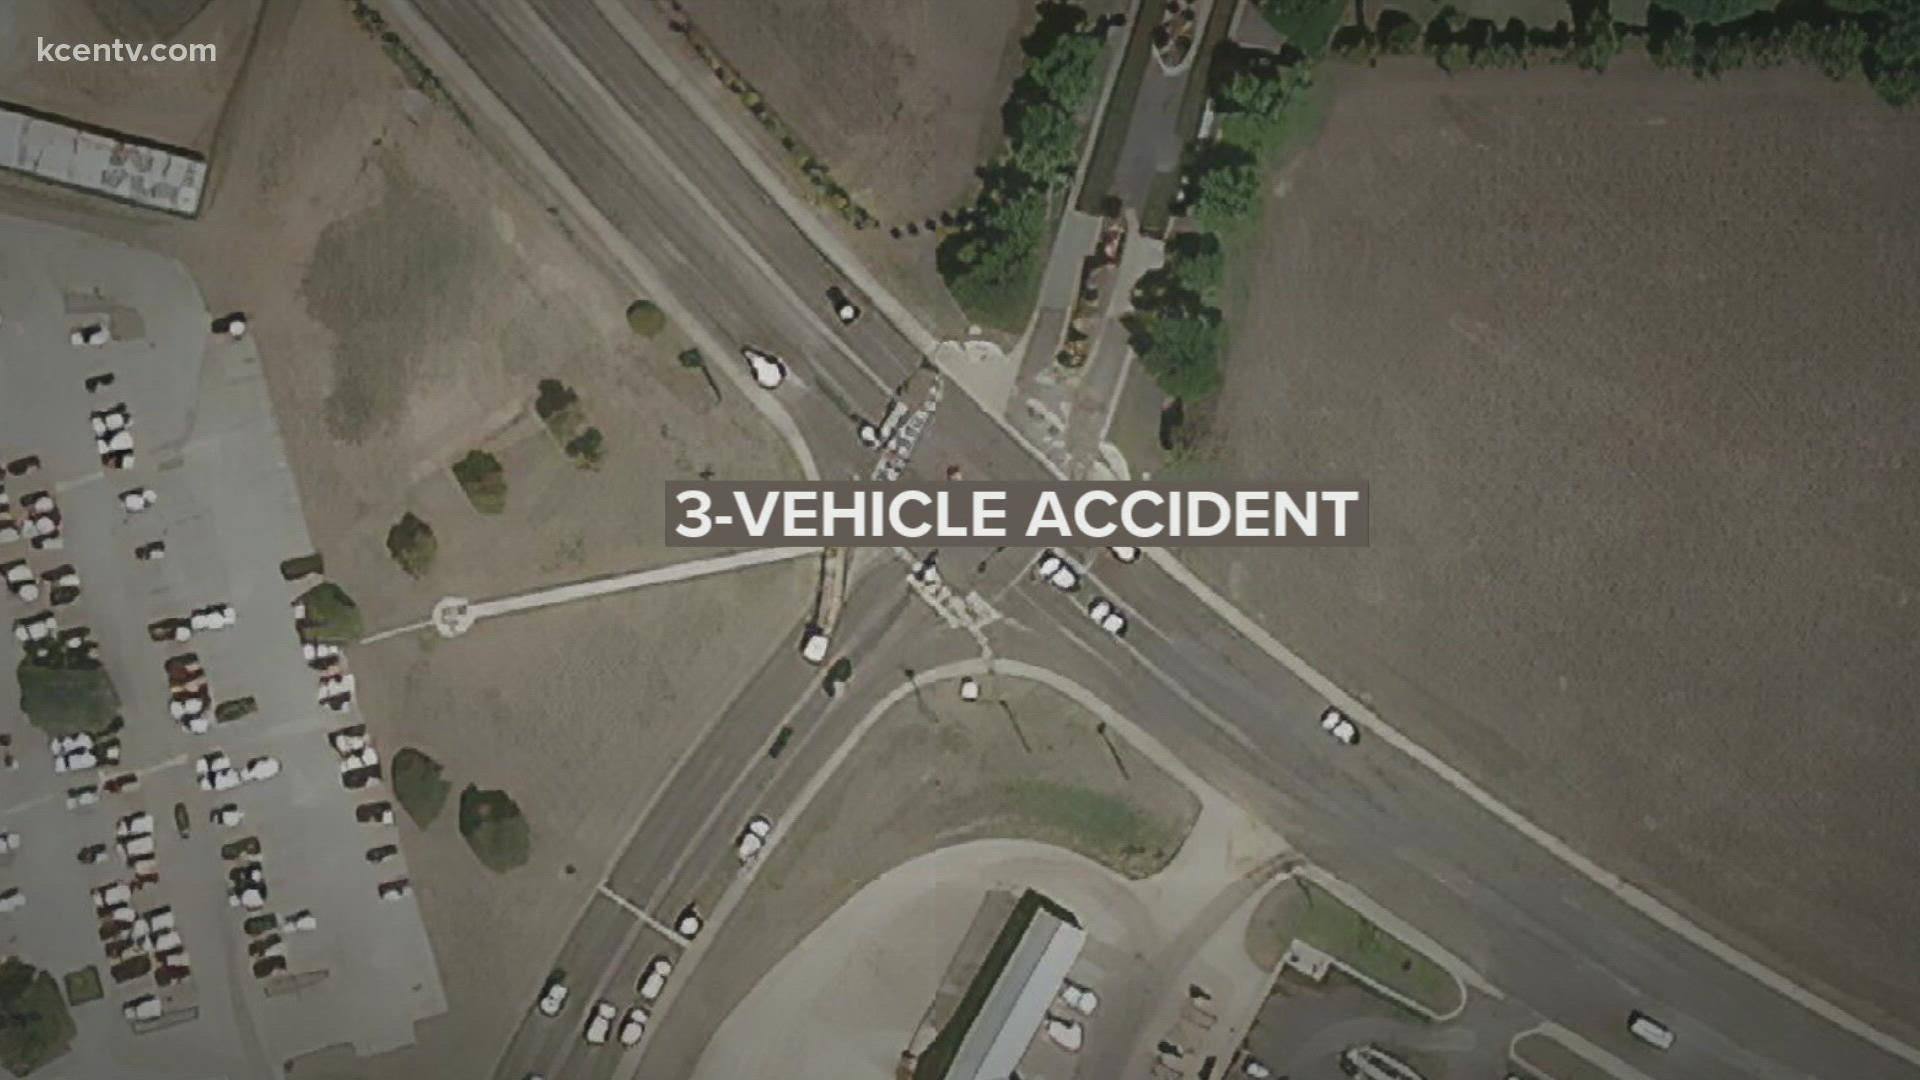 One person died after being involved in a three-vehicle crash in Belton Friday, according to the Belton Police Department.